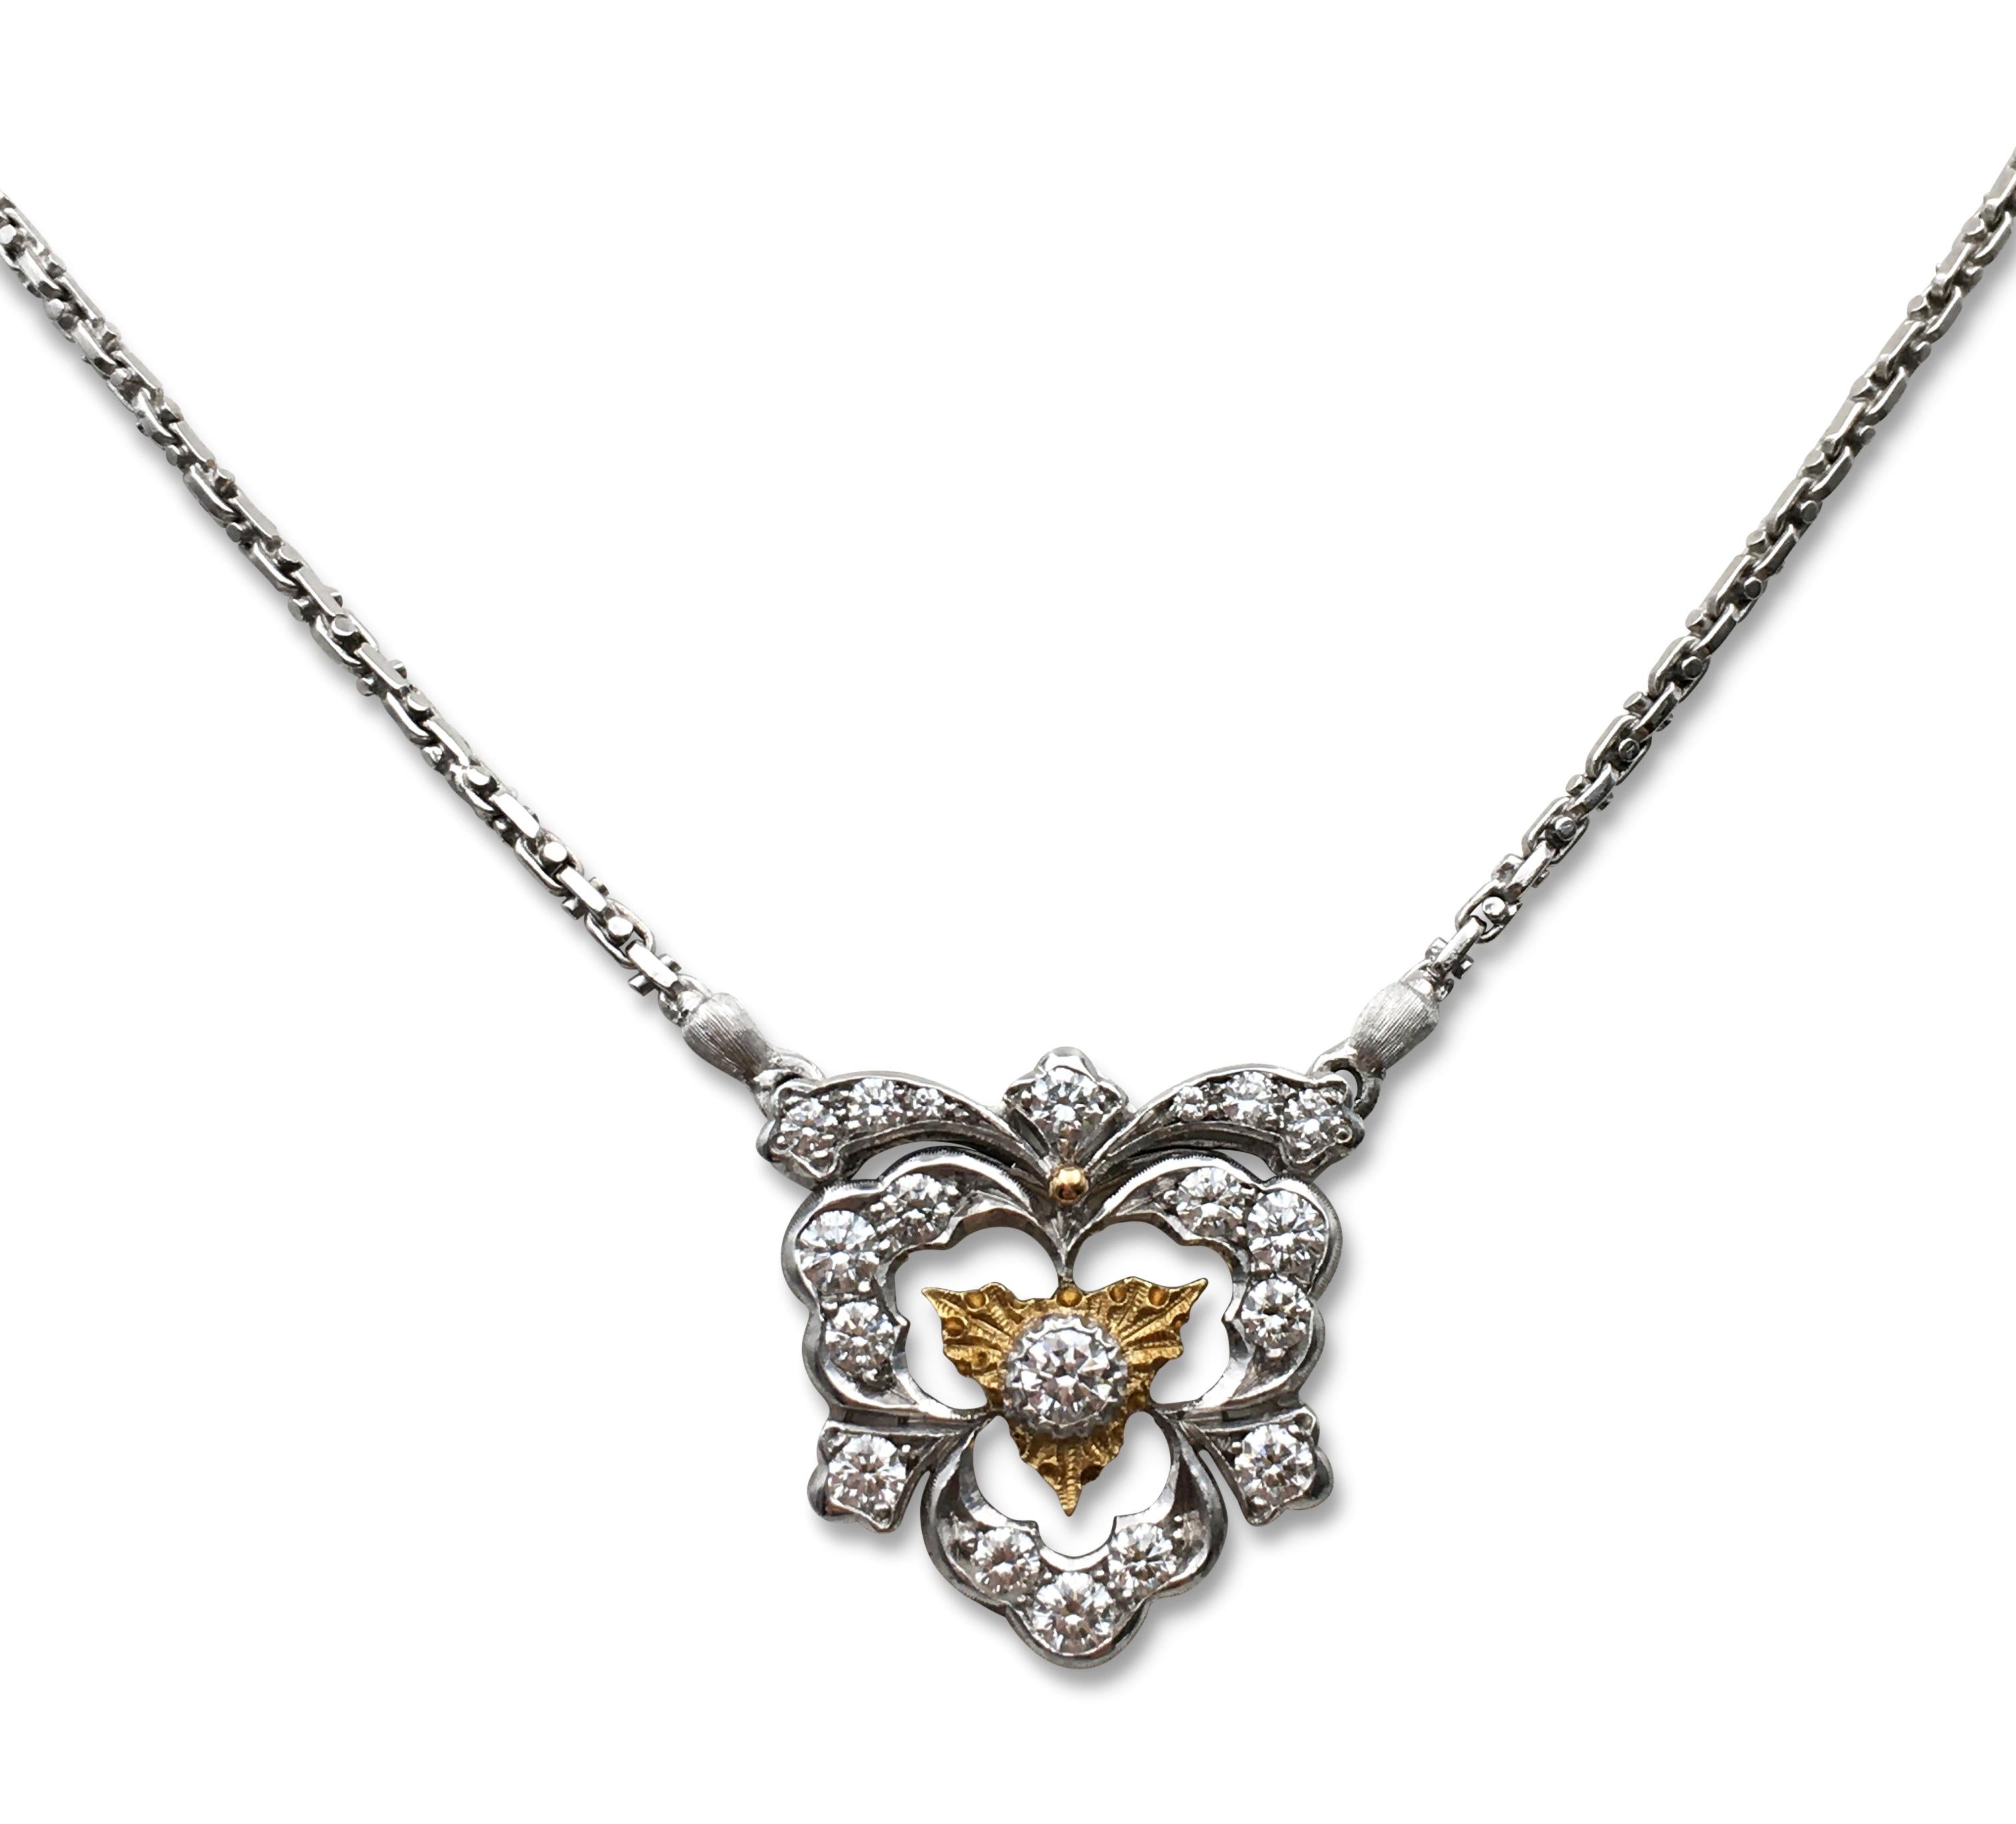 Authentic hand-made Buccellati necklace crafted in 18 karat white and yellow gold. The necklace is strung with a pendant that is set with an estimated 0.90 carats of high-quality round brilliant cut diamonds. Signed Buccellati Italy, 18K, with